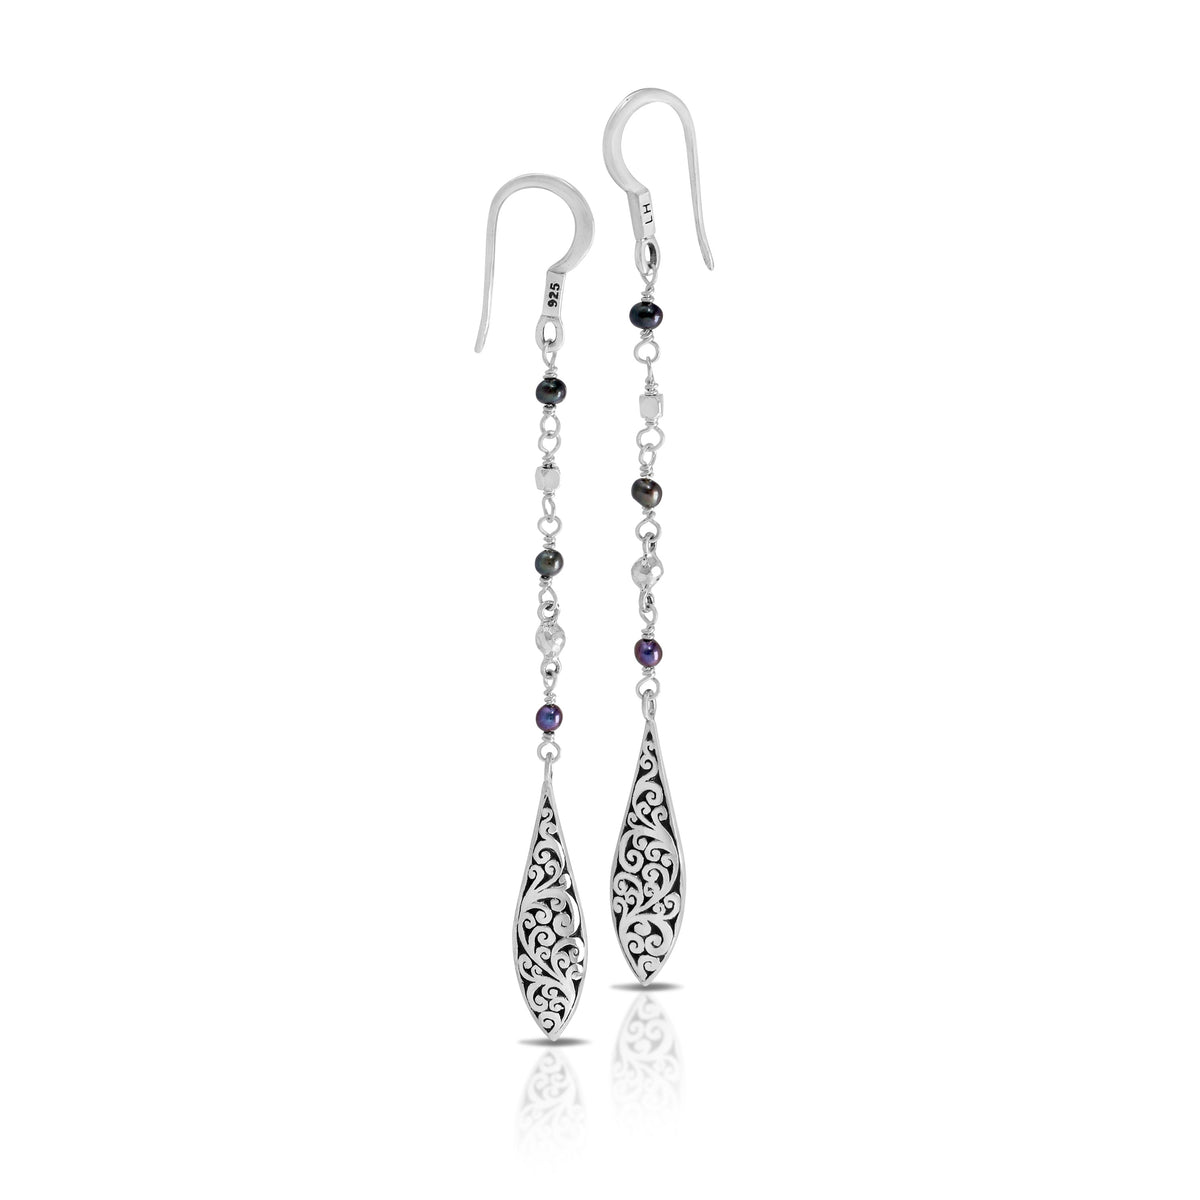 Peacock Pearl Beads Wire-Wrapped With Elongated Diamond Shaped Drop Earring